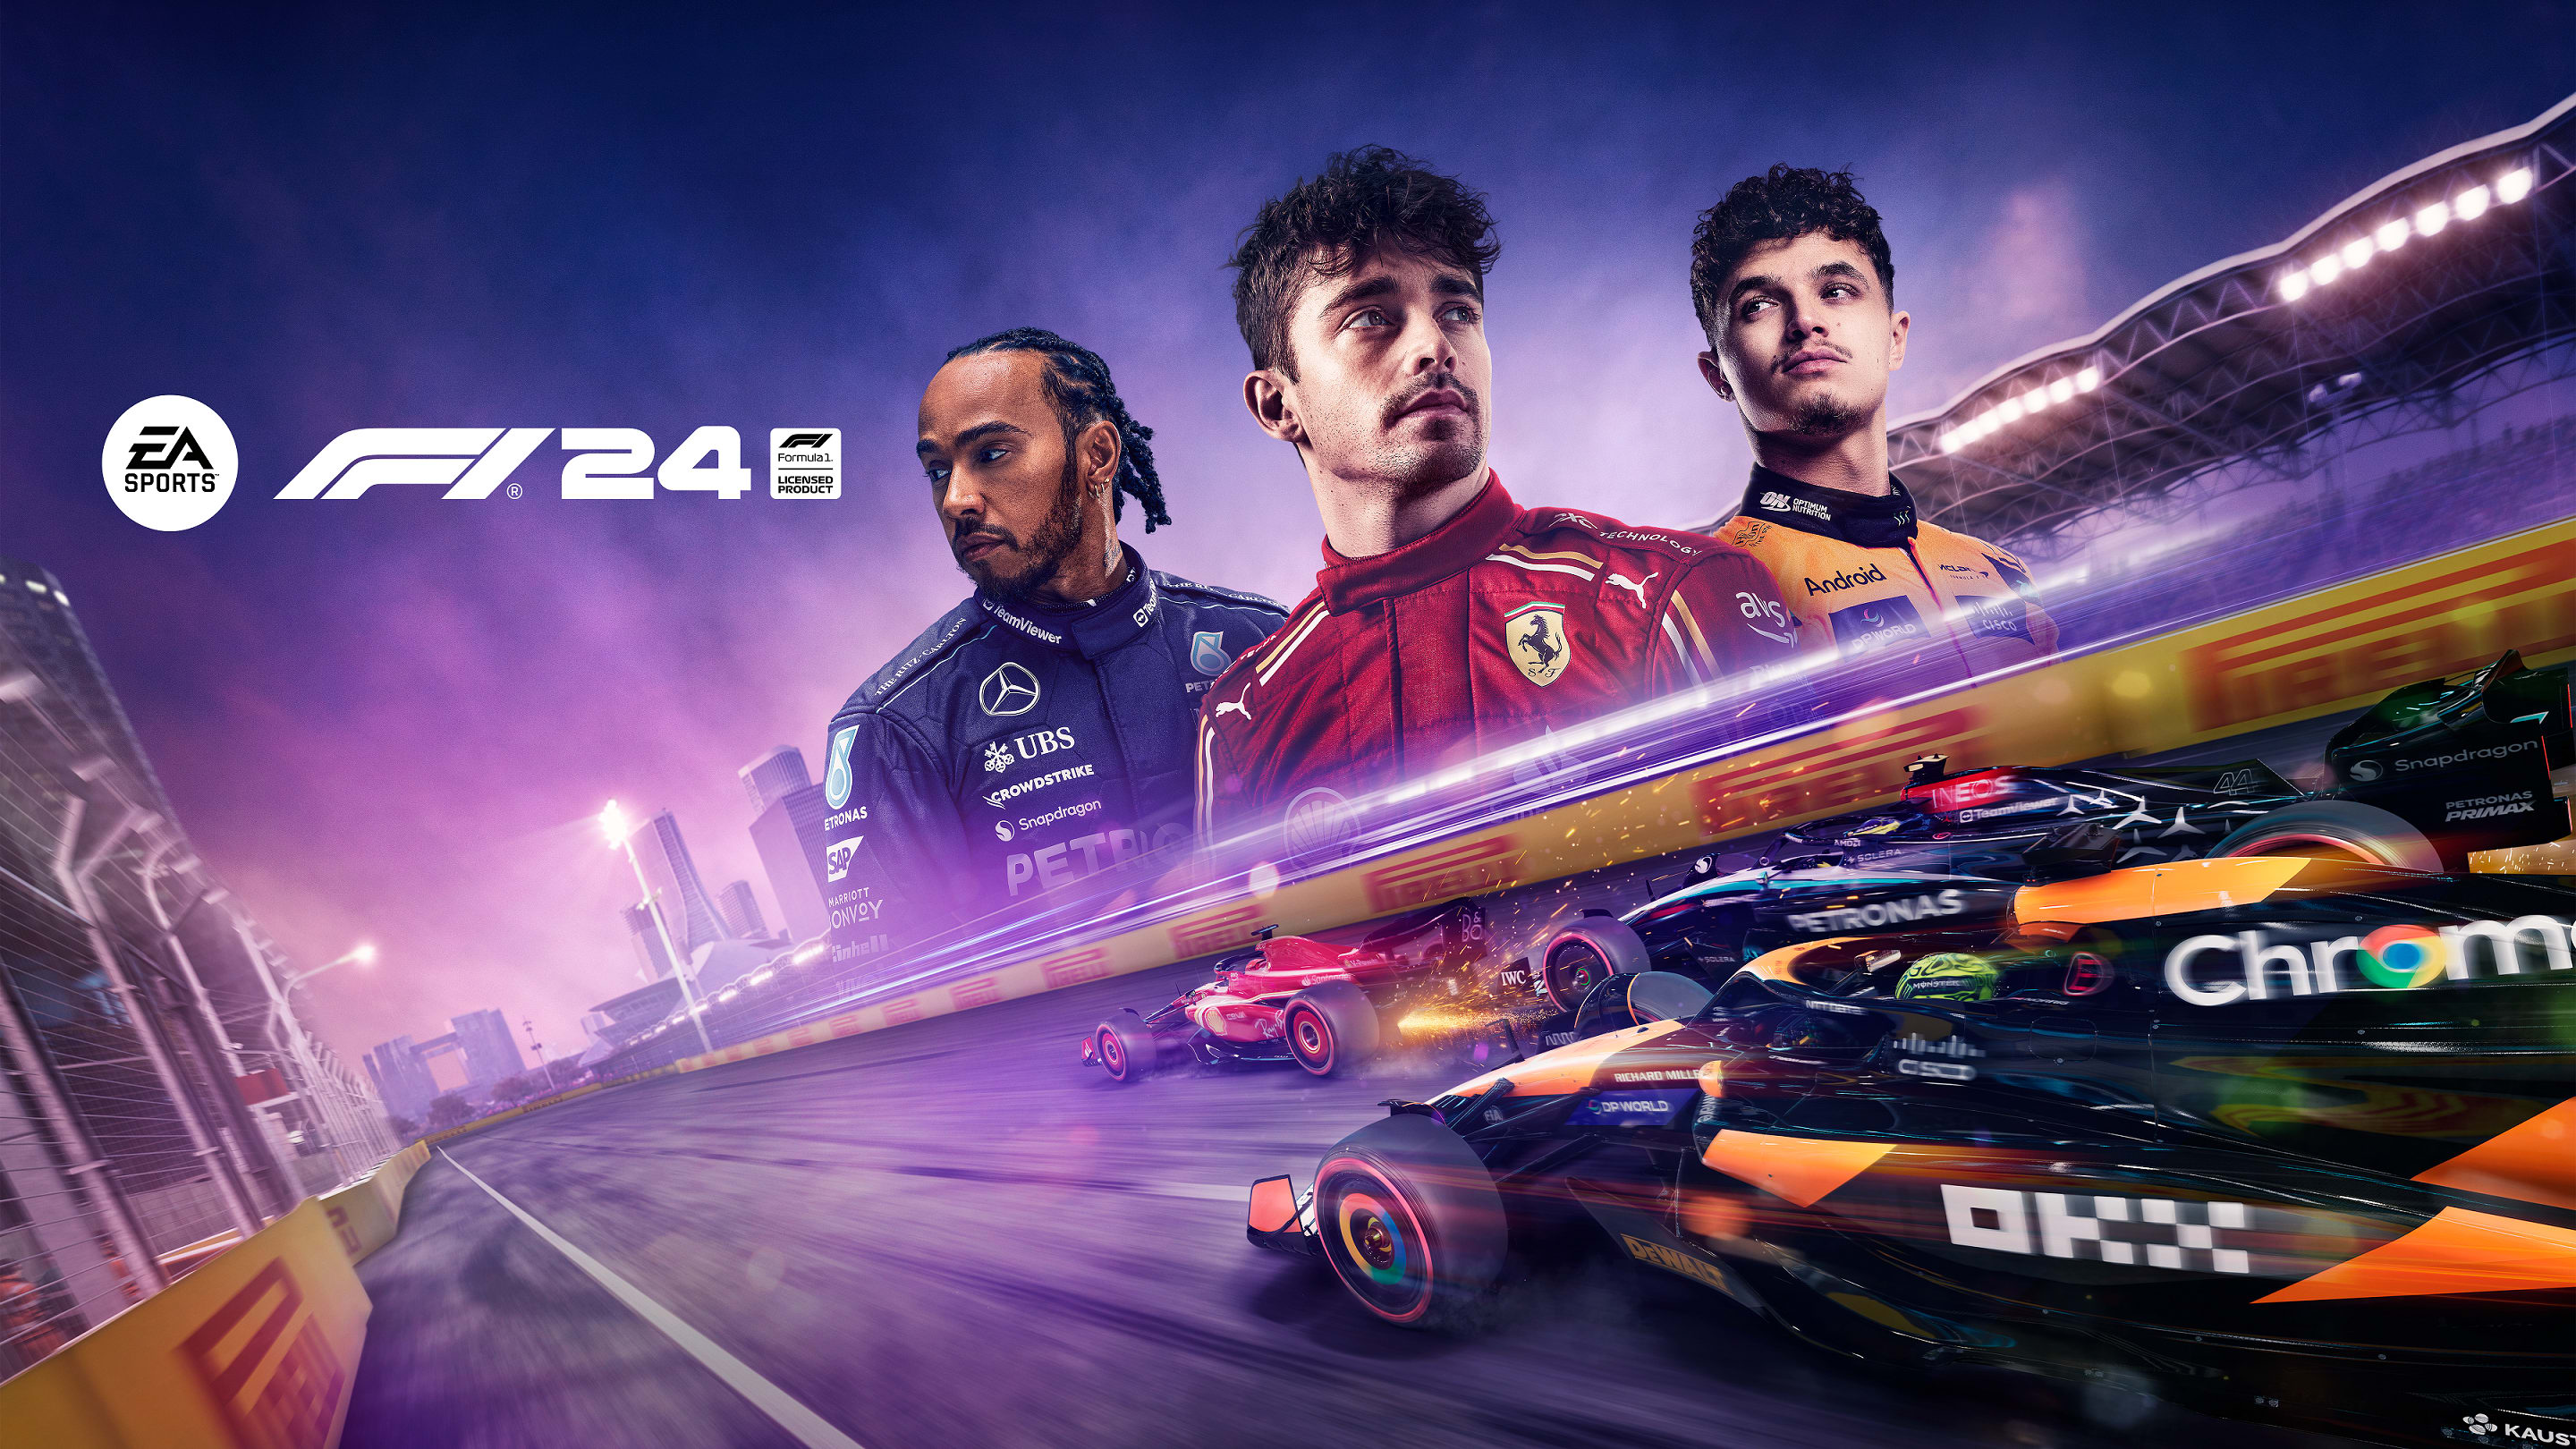 New Career Mode, Updated Circuits, and More in EA Sports’ F1 24 Launch